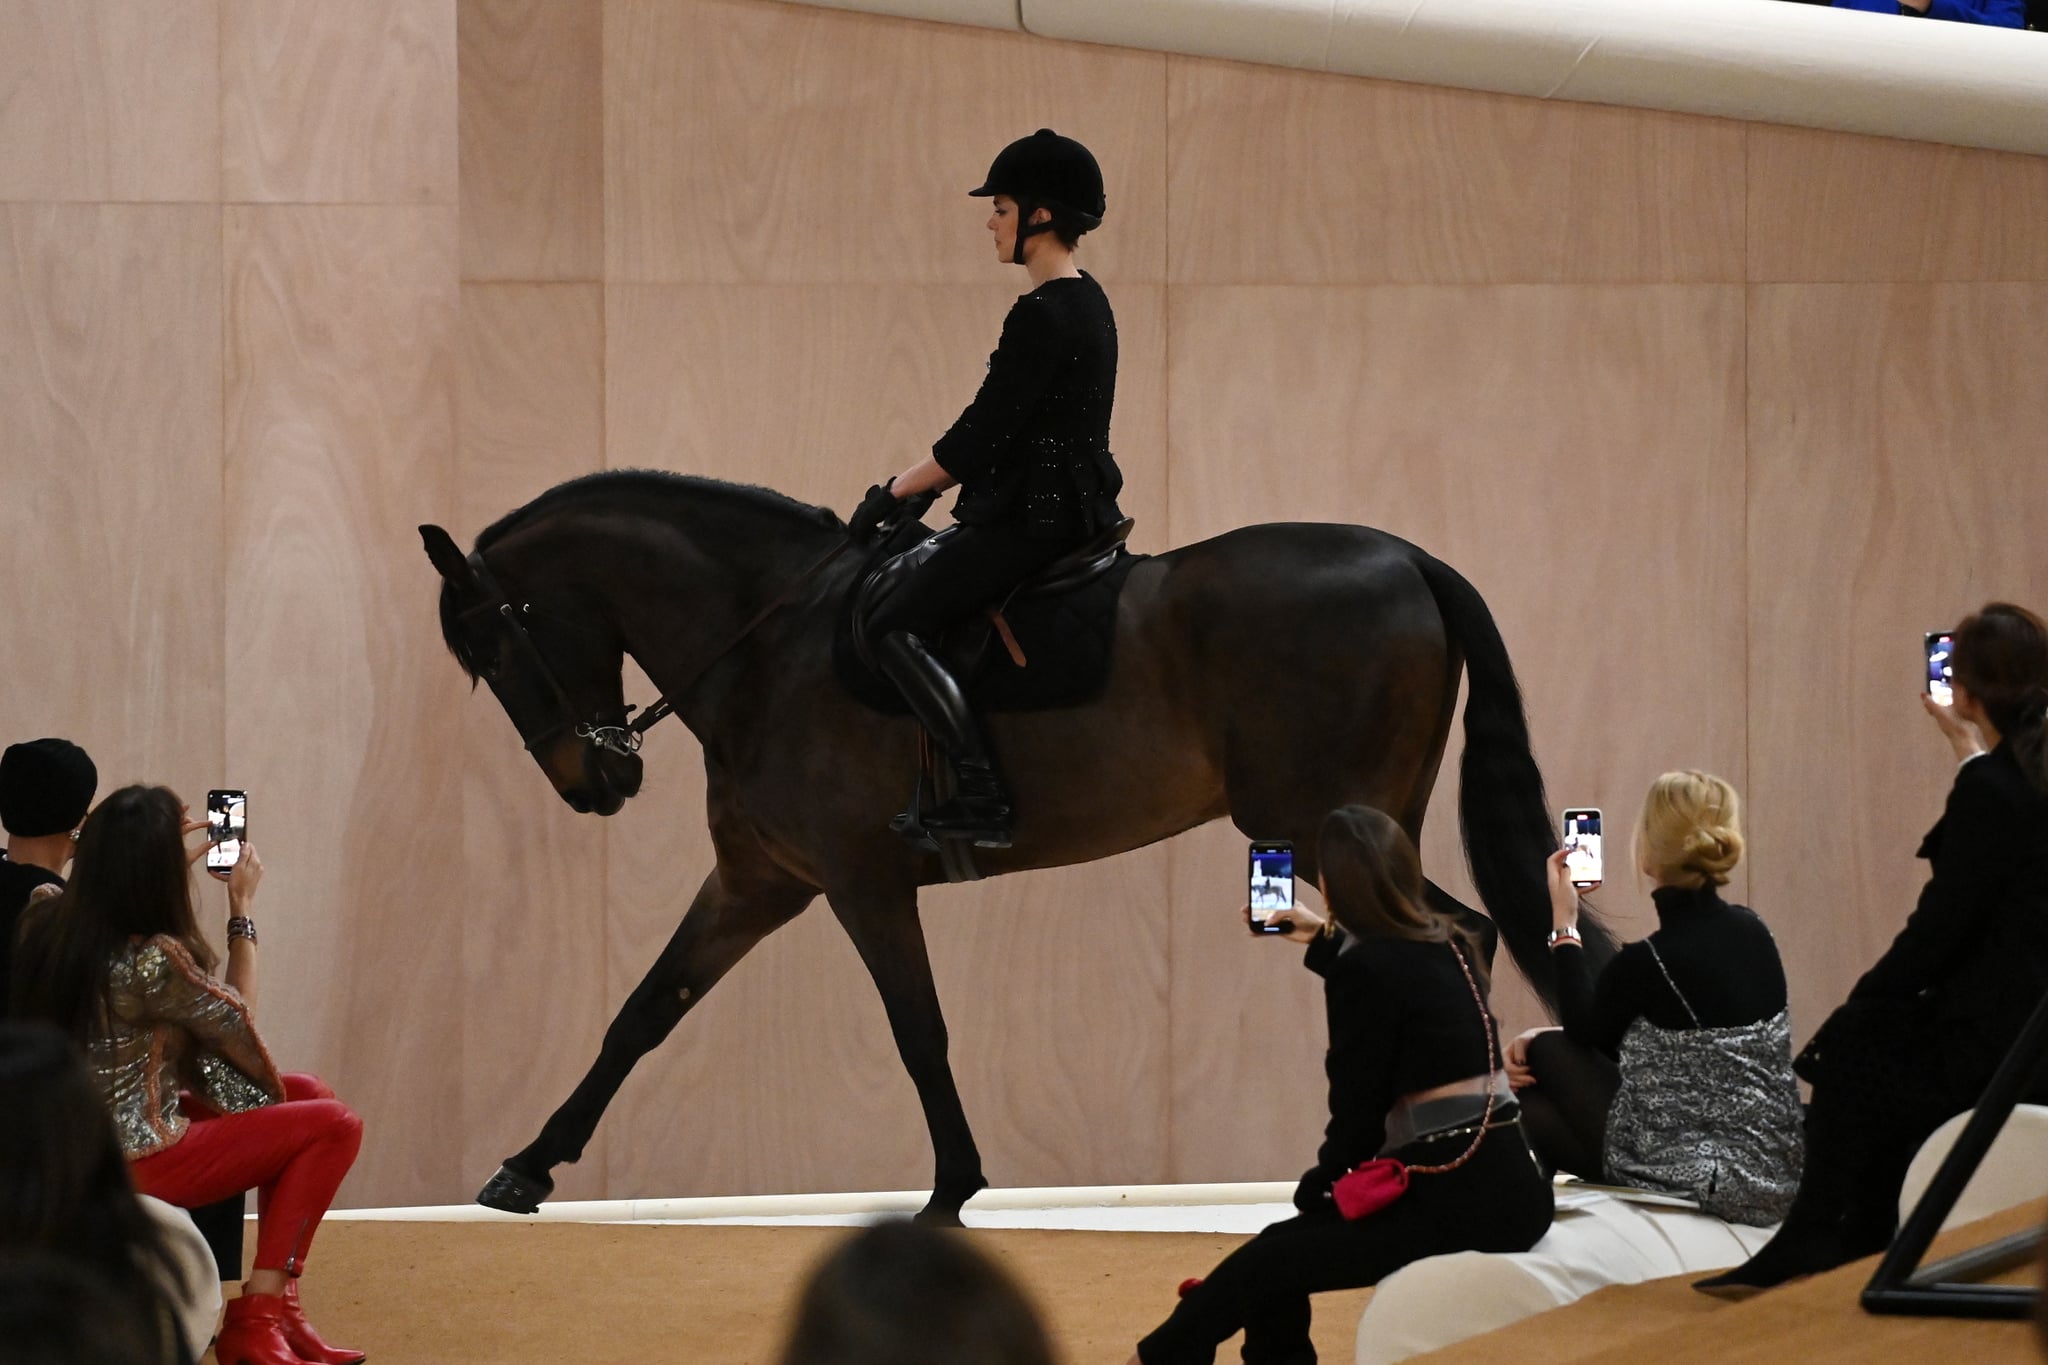 PARIS, FRANCE - JANUARY 25: (EDITORIAL USE ONLY - For Non-Editorial use please seek approval from Fashion House) Charlotte Casiraghi rides a horse on the runway during the Chanel Haute Couture Spring/Summer 2022 show as part of Paris Fashion Week at Le Grand Palais Ephemere on January 25, 2022 in Paris, France. (Photo by Pascal Le Segretain/Getty Images)